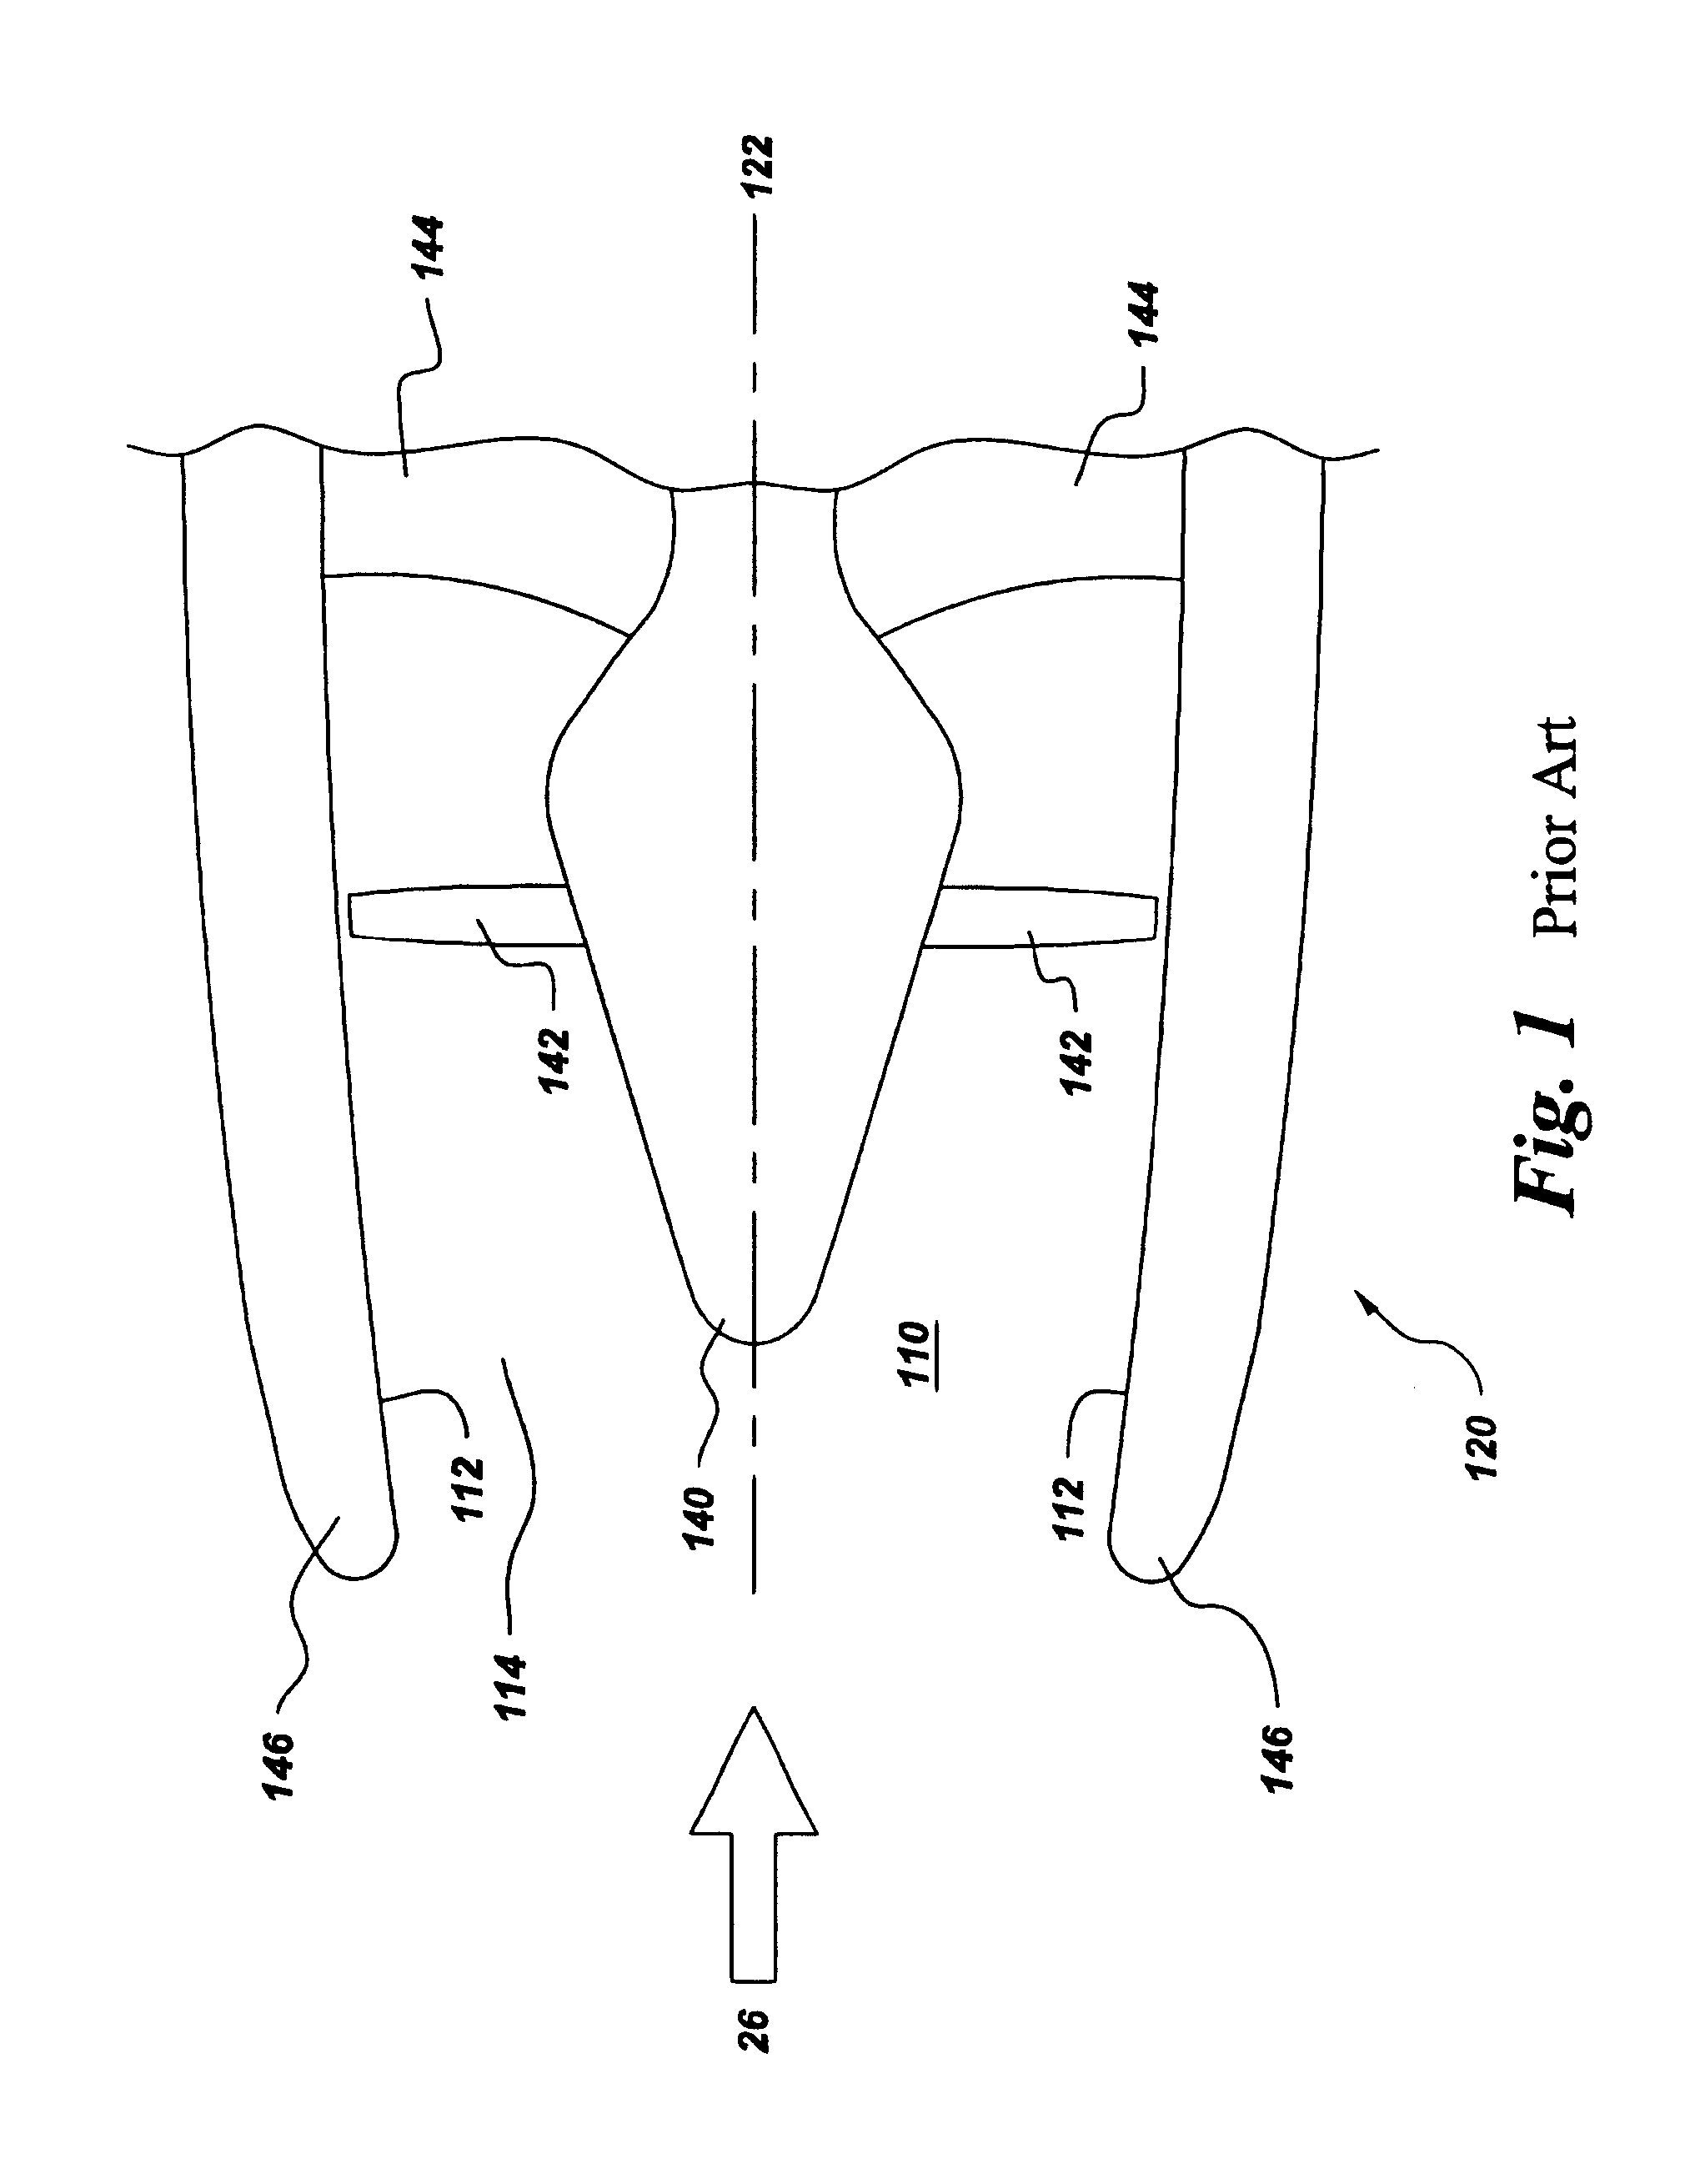 System and method for actively changing an effective flow-through area of an inlet region of an aircraft engine